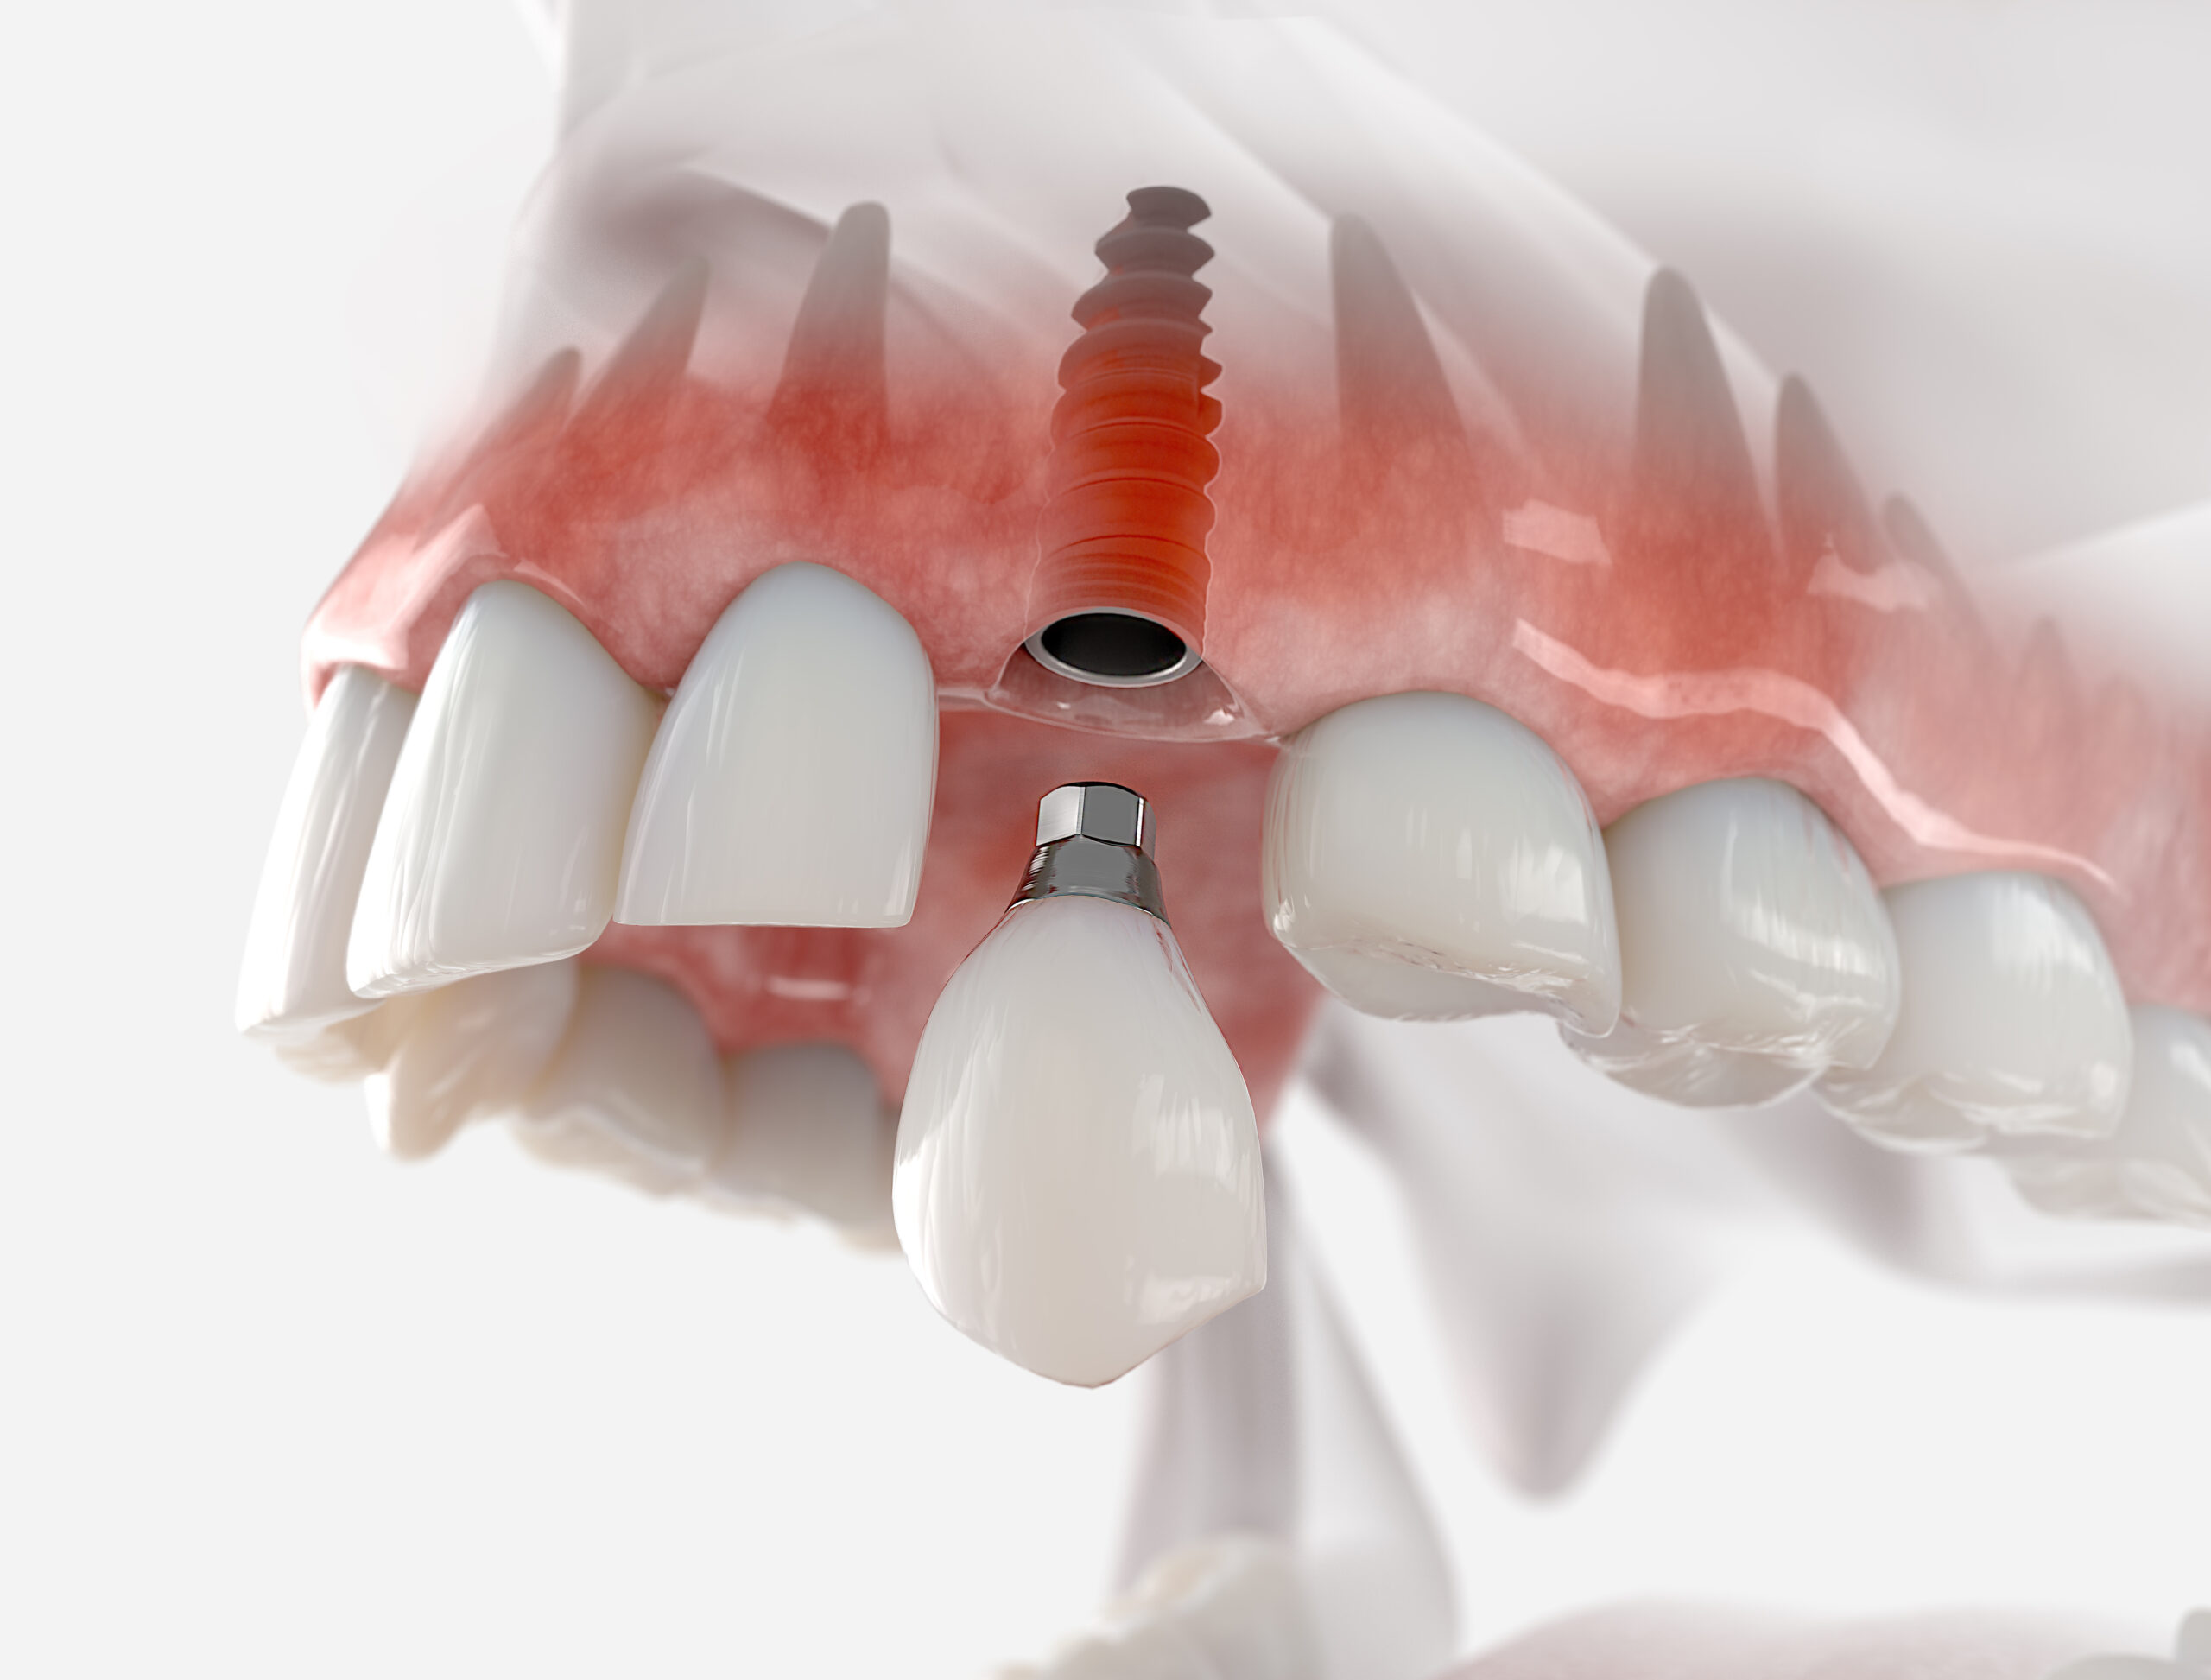 Interested In Dental Implants In Fort Lauderdale, FL? These Are The Types Of Dental Implants You Can Get Treated With